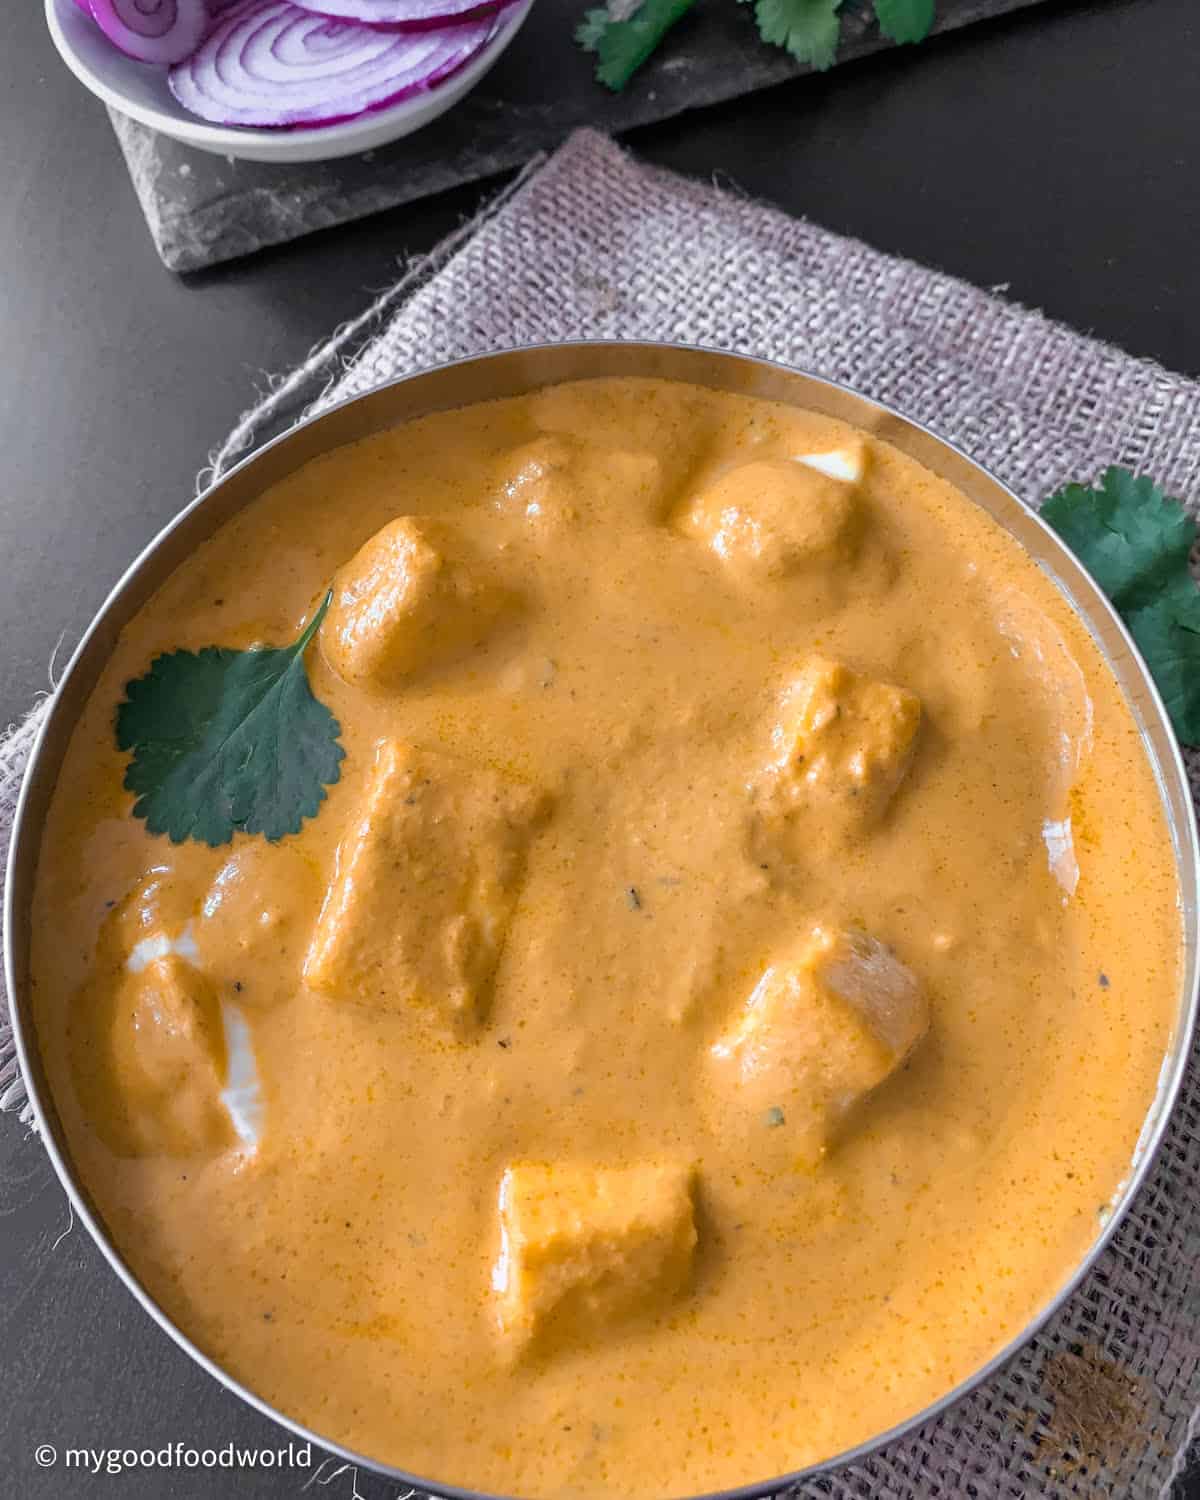 A photo of a creamy orange gravy with paneer chunks in a white bowl on a gray countertop. There is a red onion and cilantro next to the bowl.